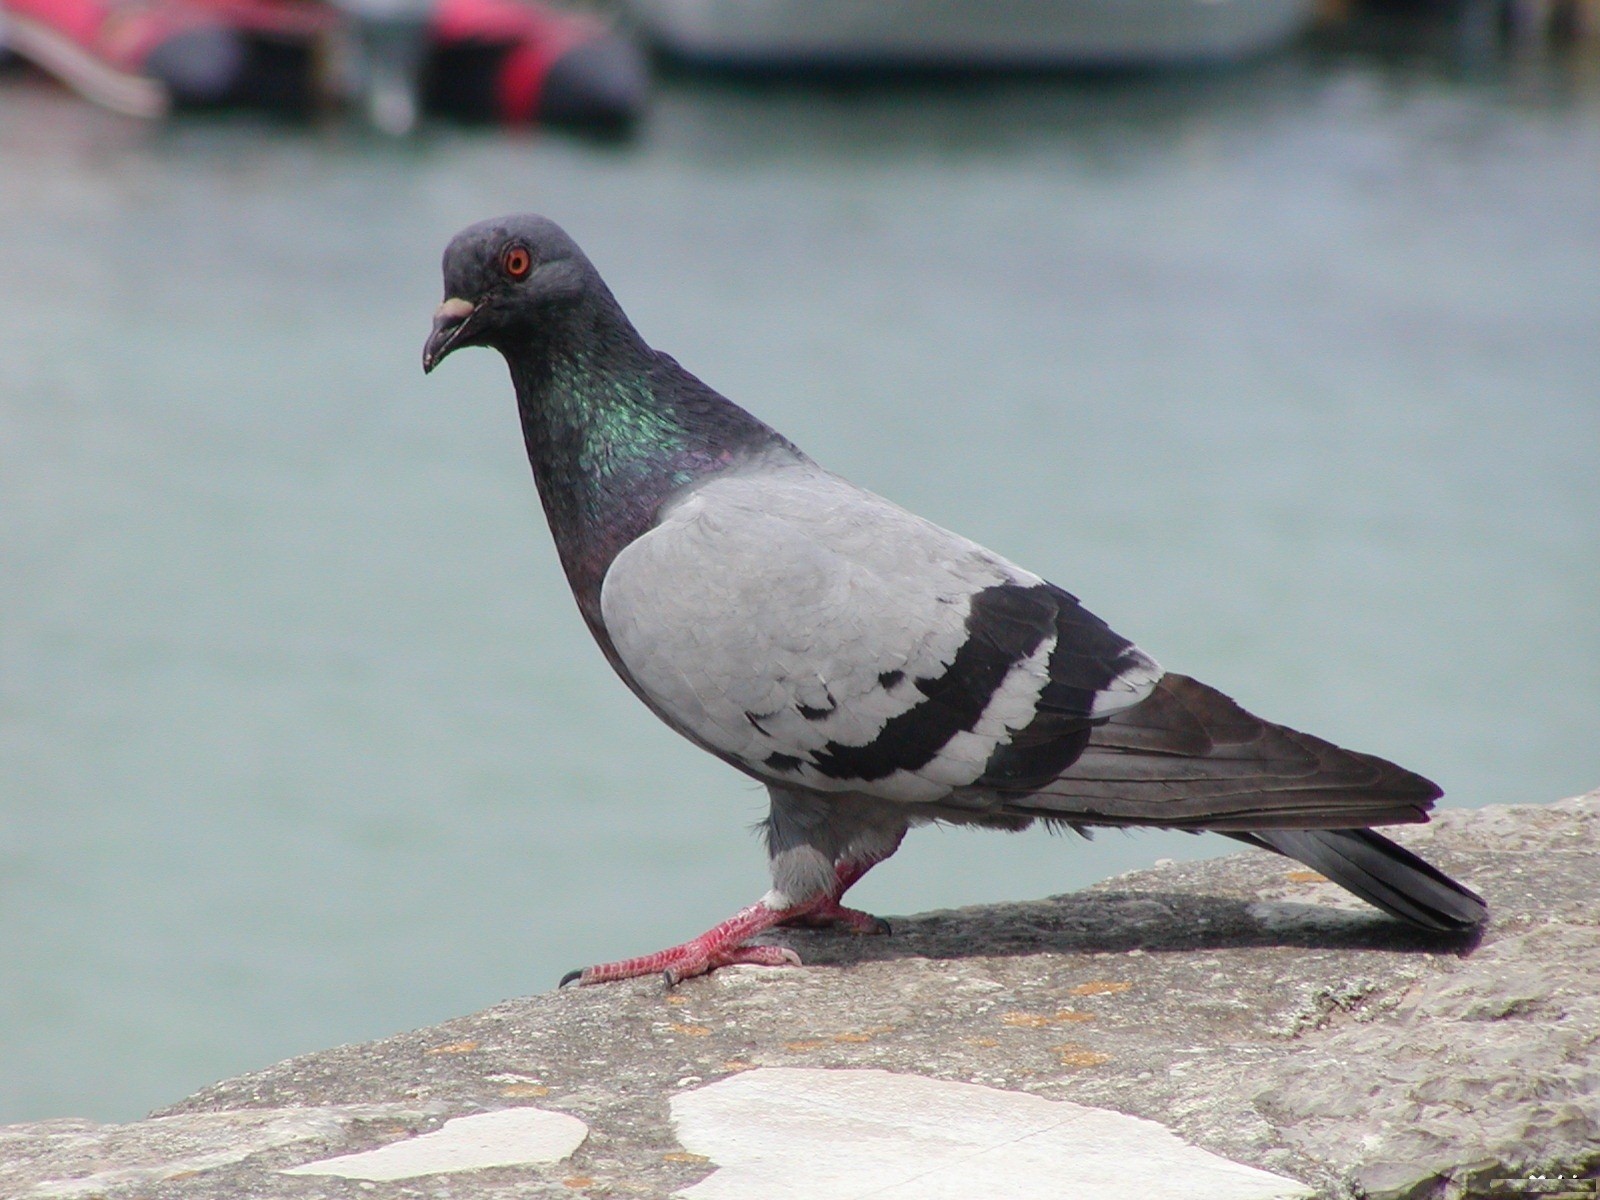 Homing Pigeon Sitting on Wall | HD Wallpapers